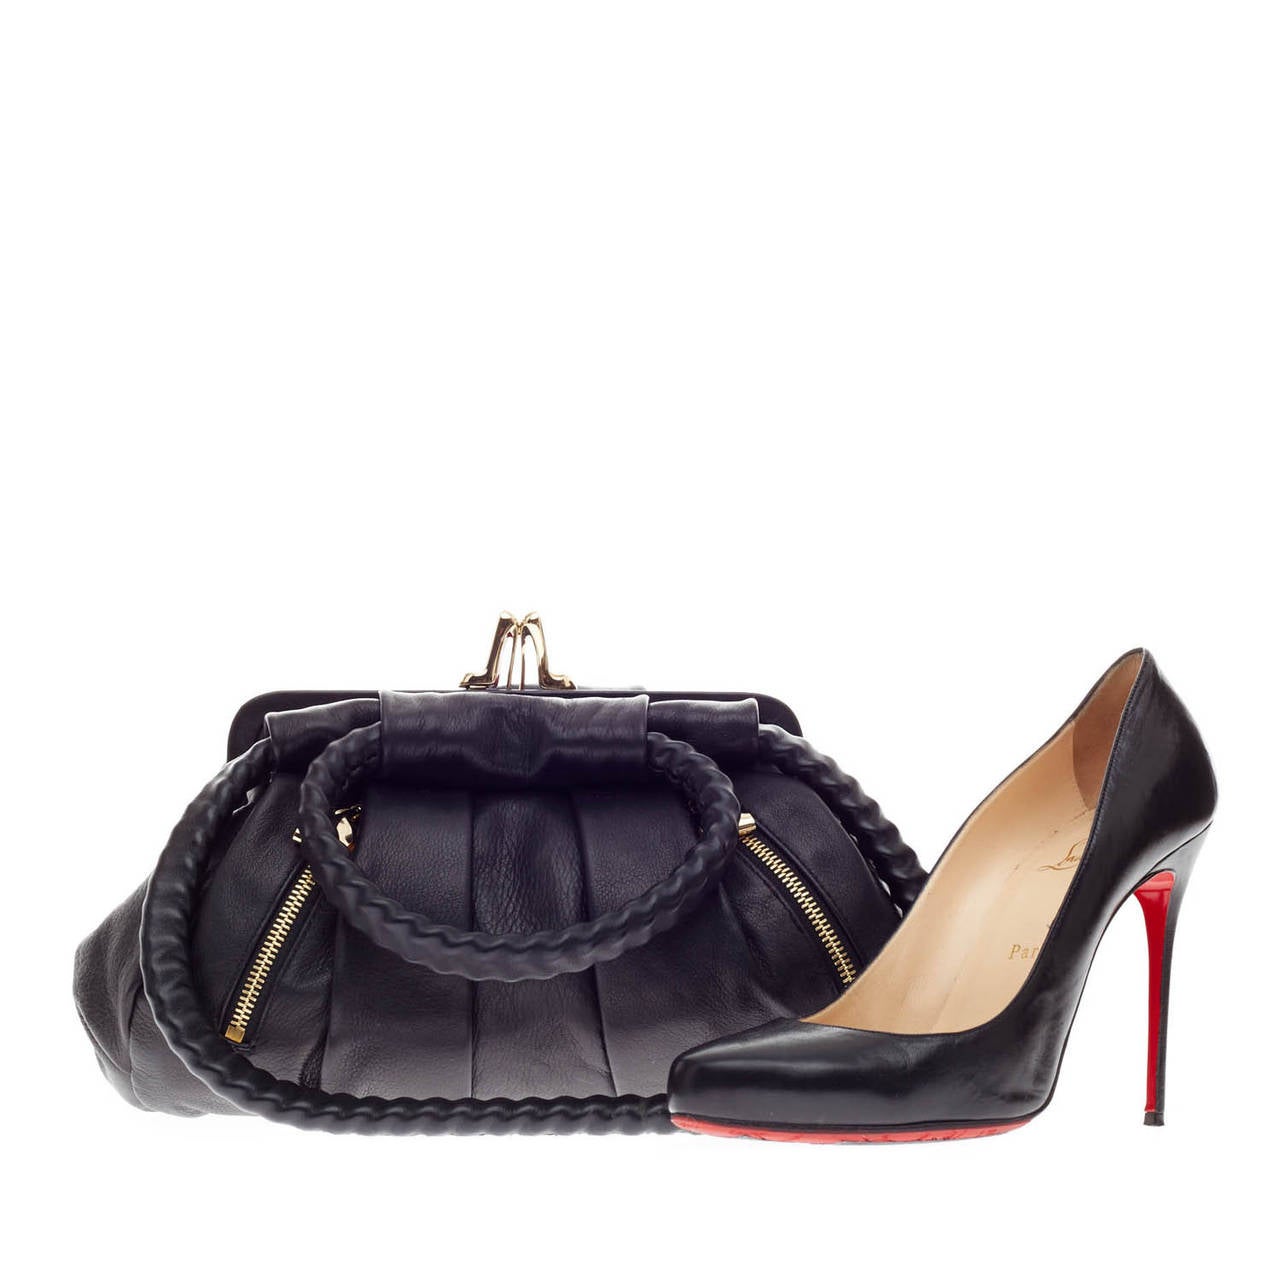 This authentic Christian Louboutin Loubette Leather in Small is a chic accessory to complement an equally stylish outfit. Crafted from smooth black leather and gold-tone hardware, this pleated frame bag features a stylish lady heel snap closure